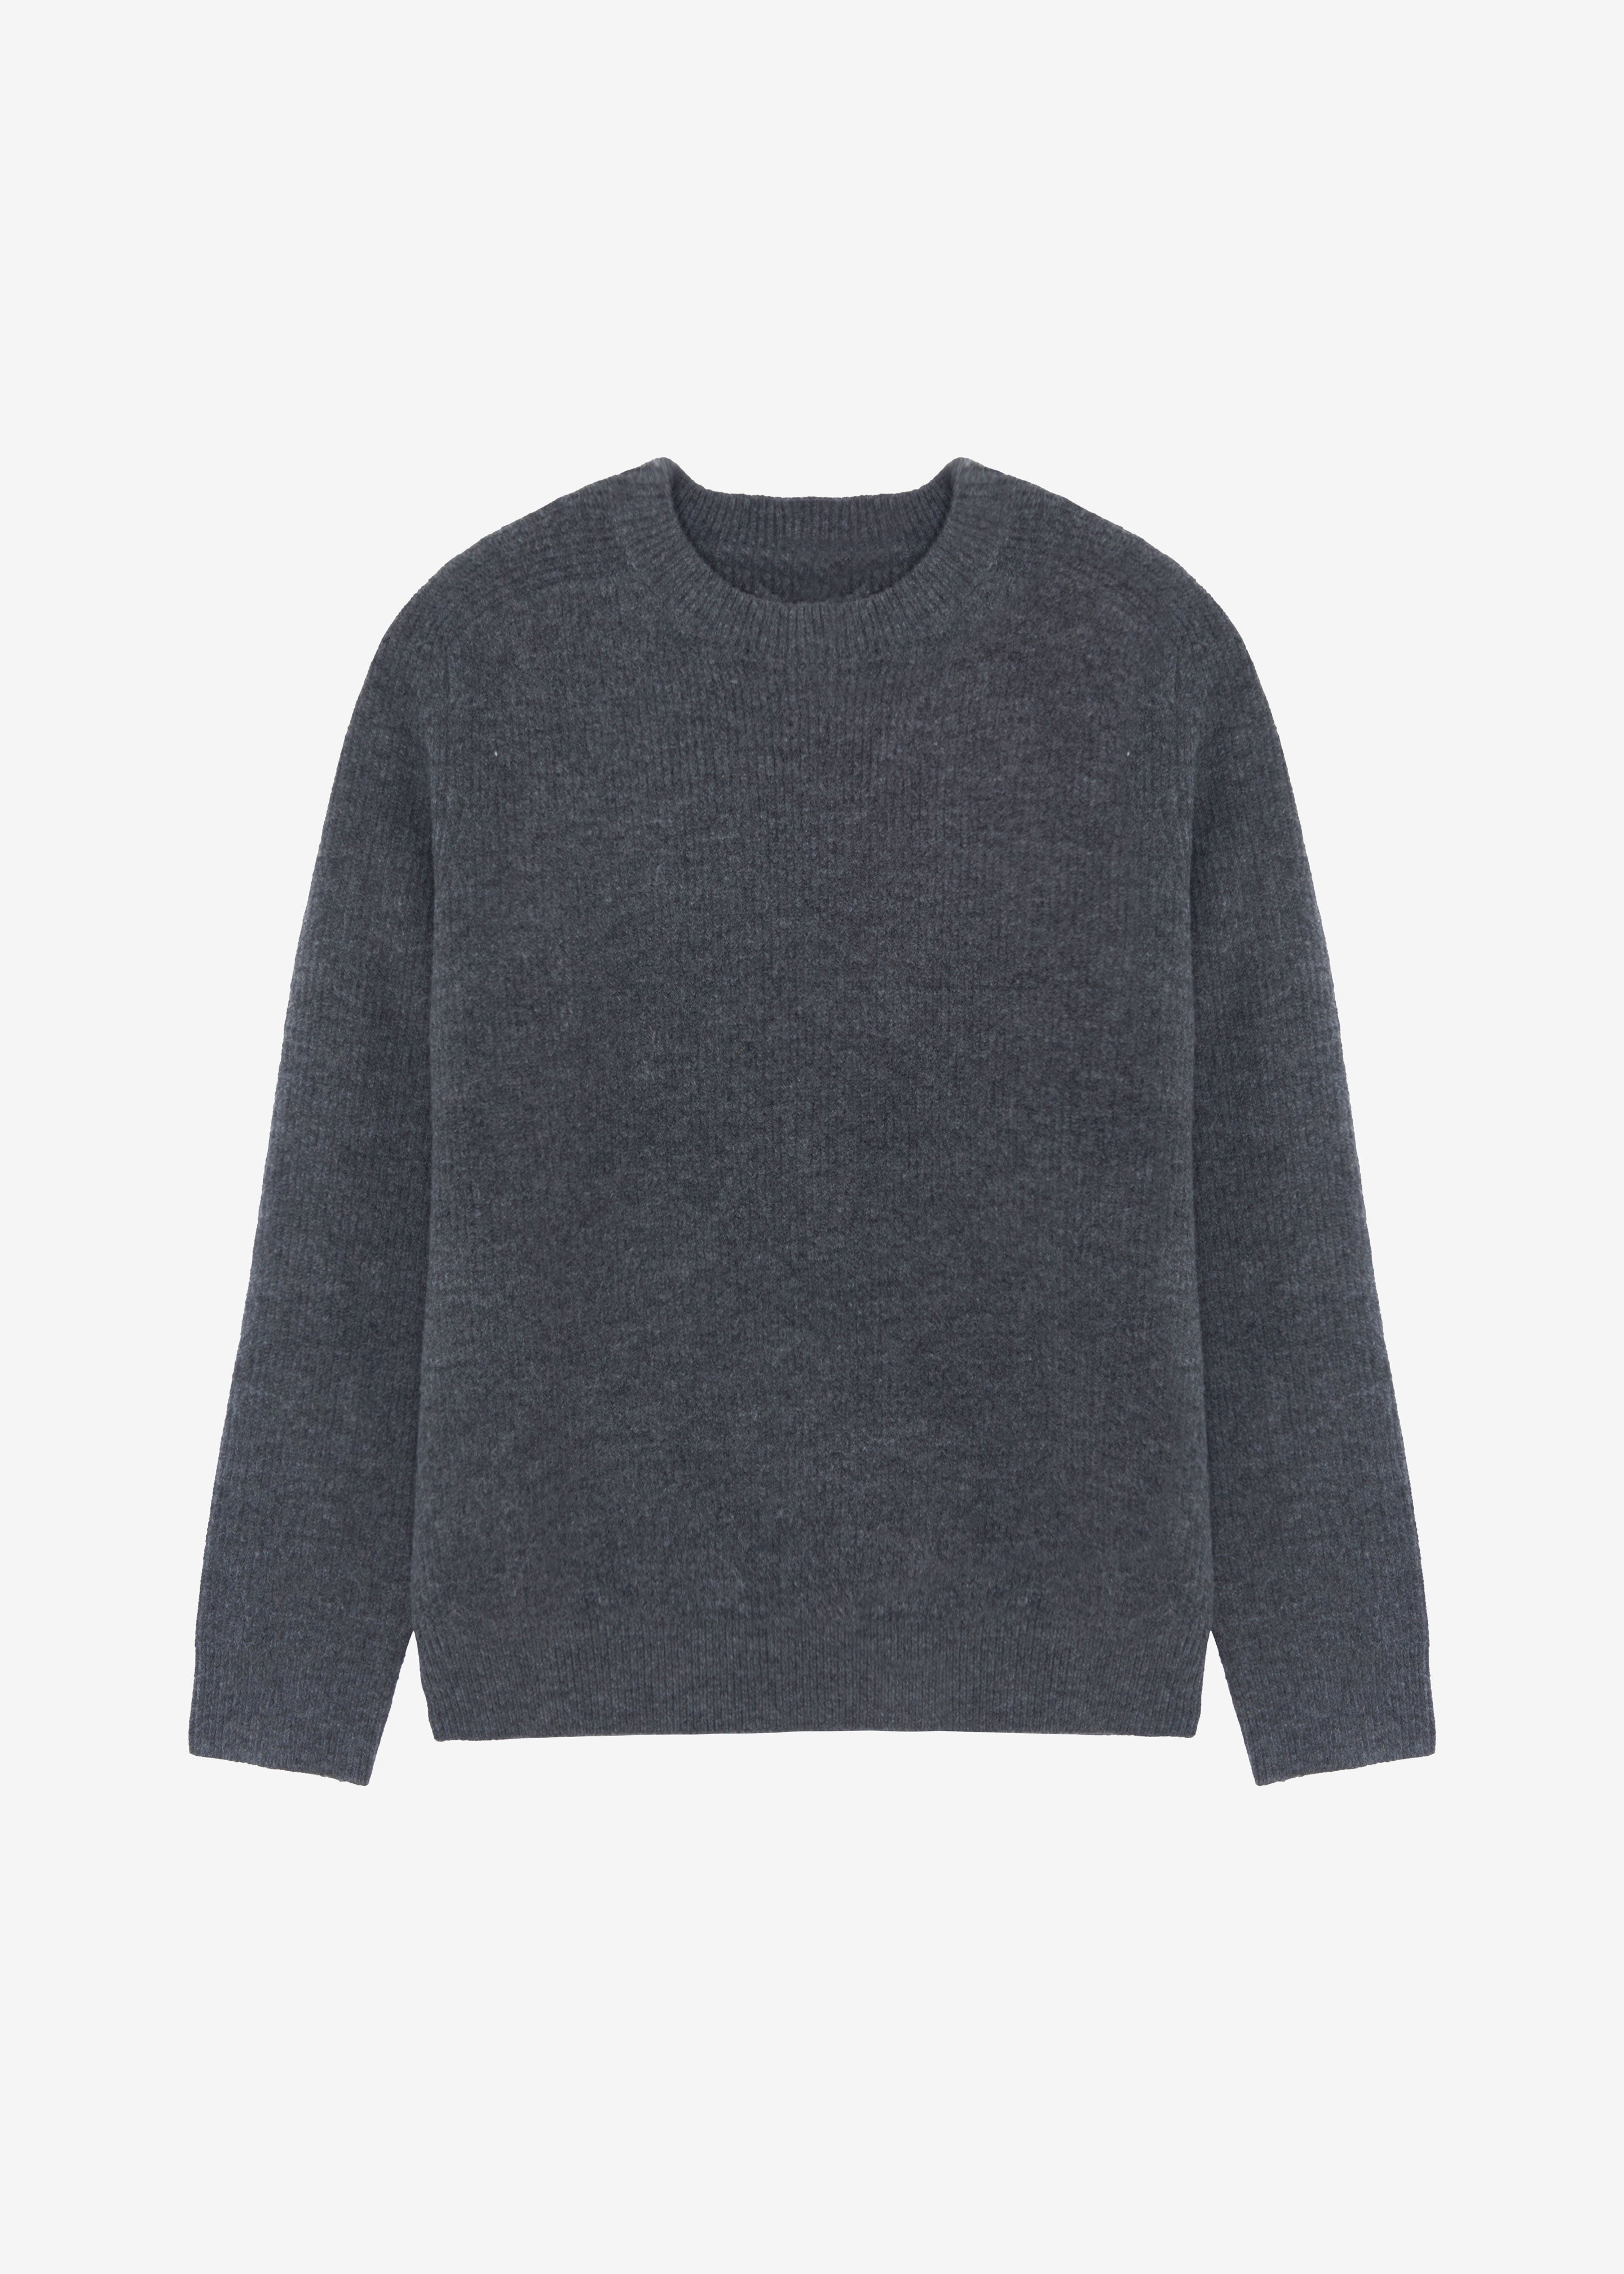 Emory Sweater - Charcoal - 19